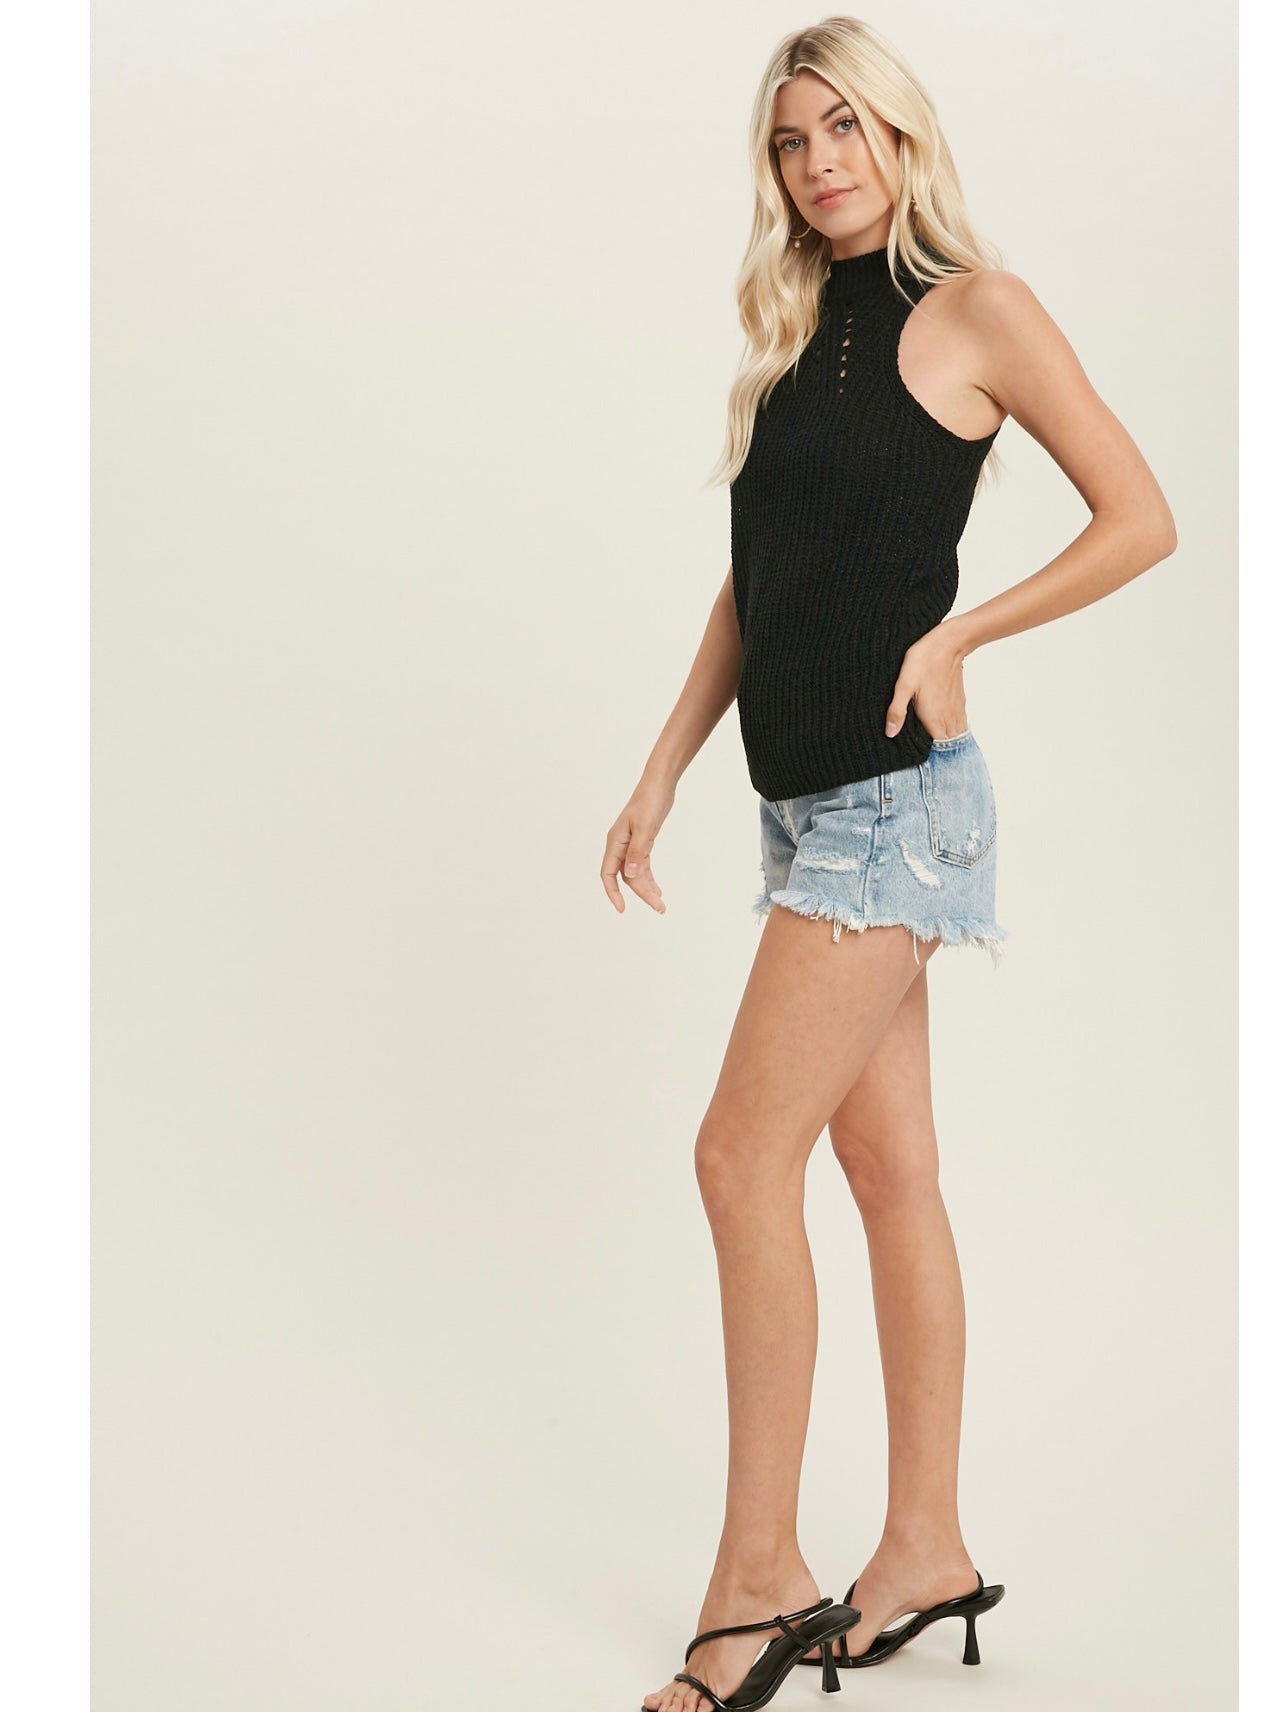 High Neck Sleeveless Knit Top in Black